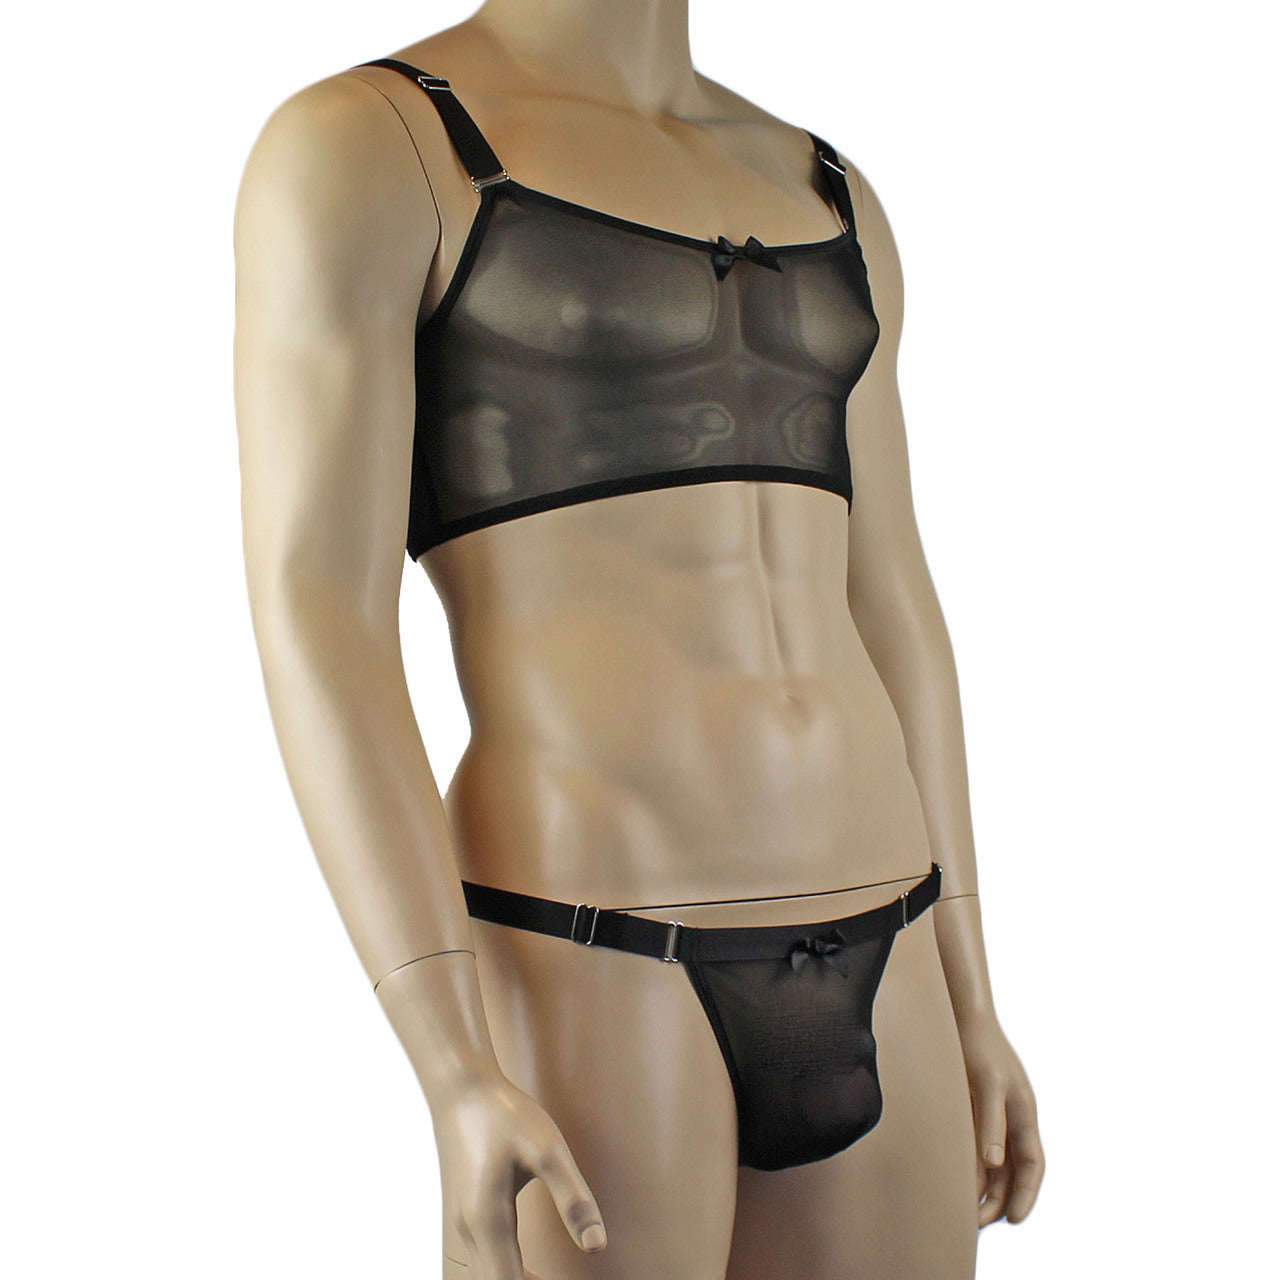 Mens Exotic Sheer Mesh Crop Bra Top Camisole & G string - Sizes up to 3XL (black plus other colours)